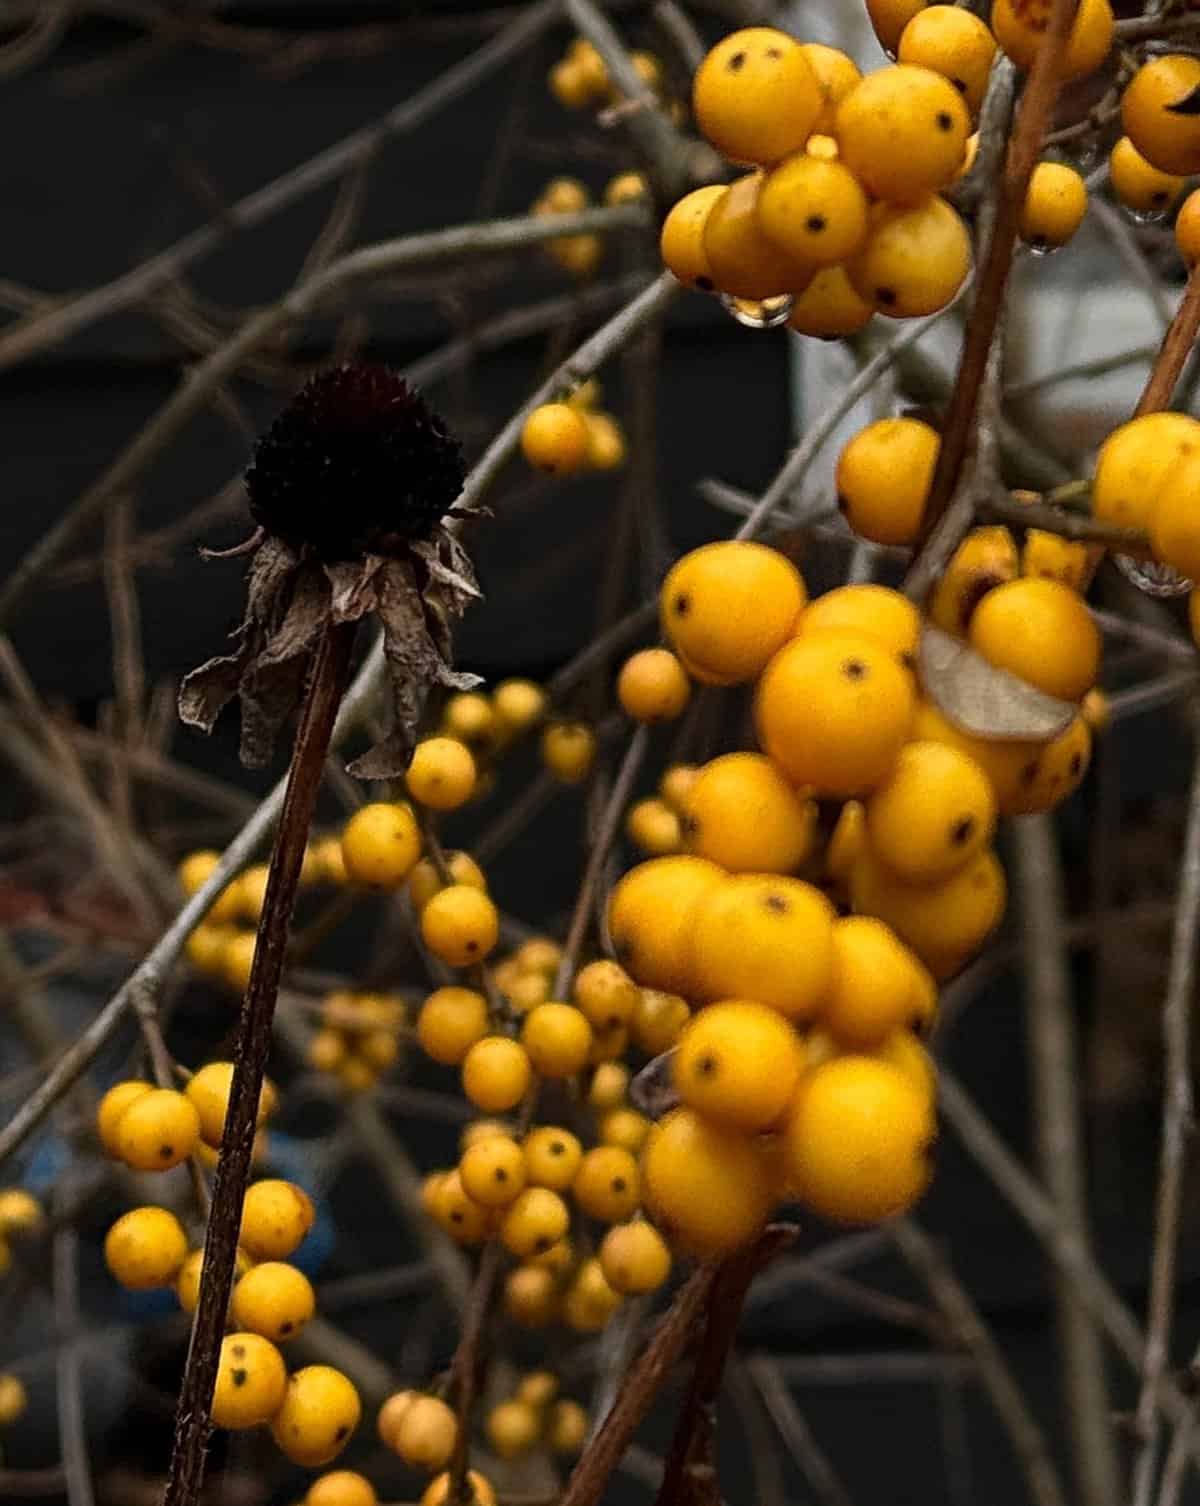 Close-up of a winterberry branch (Ilex verticillata) with clusters of bright yellow berries and a single wilted flower with a dark center. The background is blurred, highlighting the vibrant color and texture of the berries and the contrasting wilted flower.